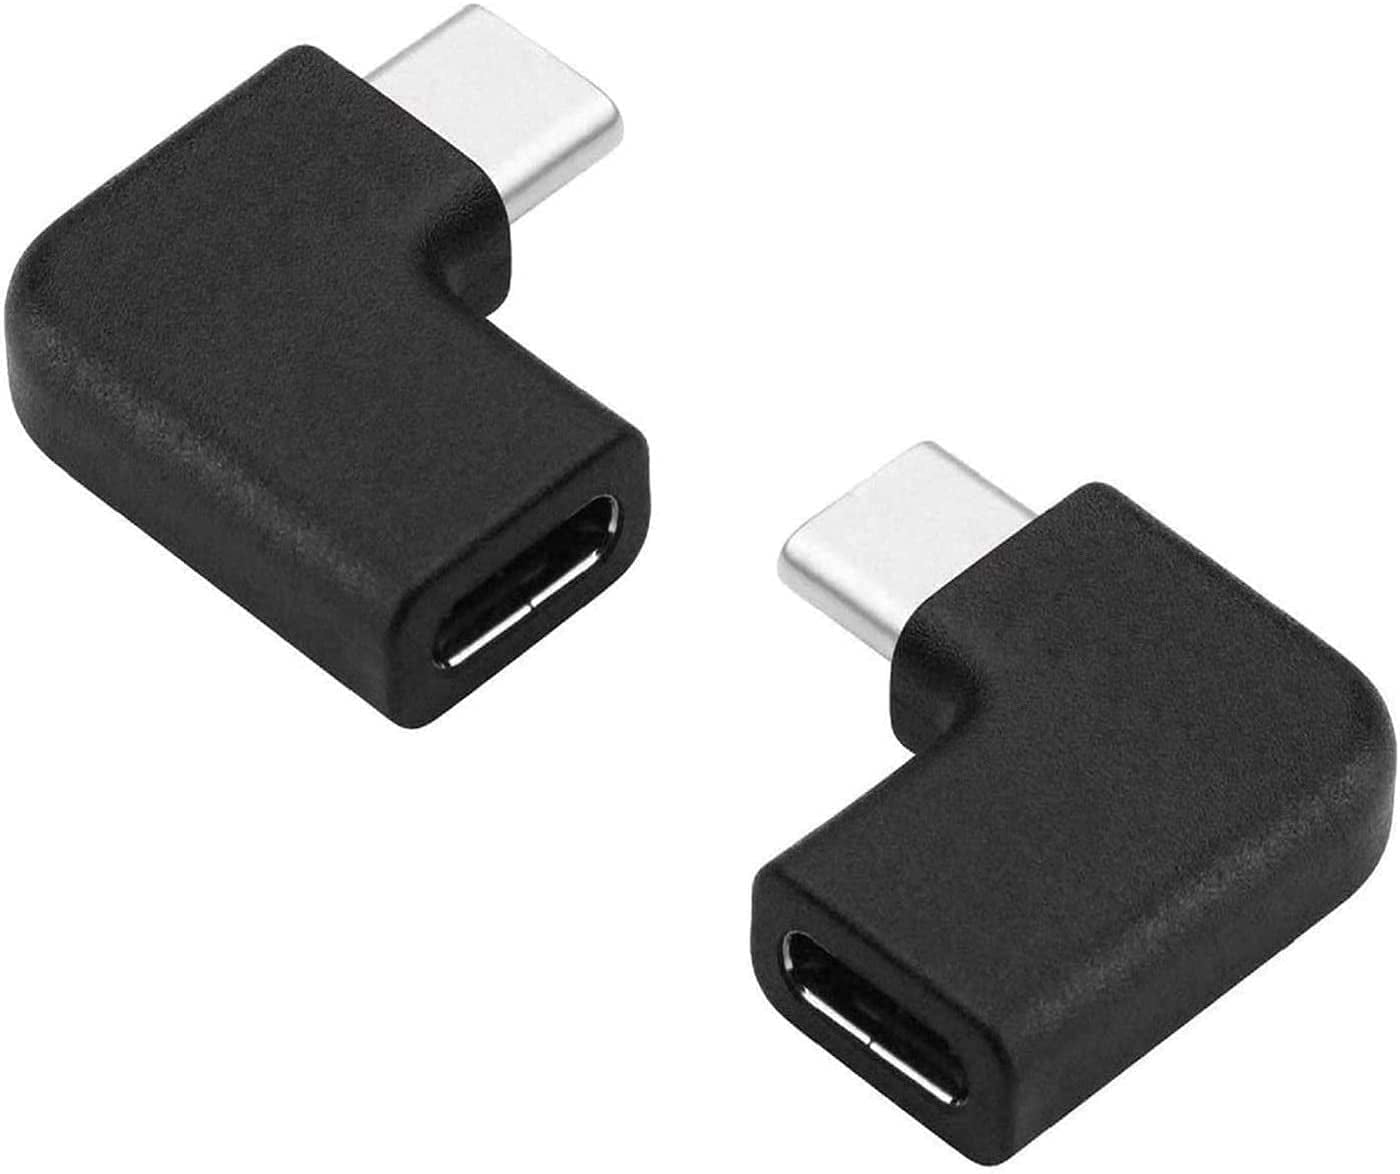 Cable Length: USB Adapter, Color: Black Cables 90 Degree Right Angle USB 2.0 Type A Male to Female Adapter Plug Converter Connector Black 